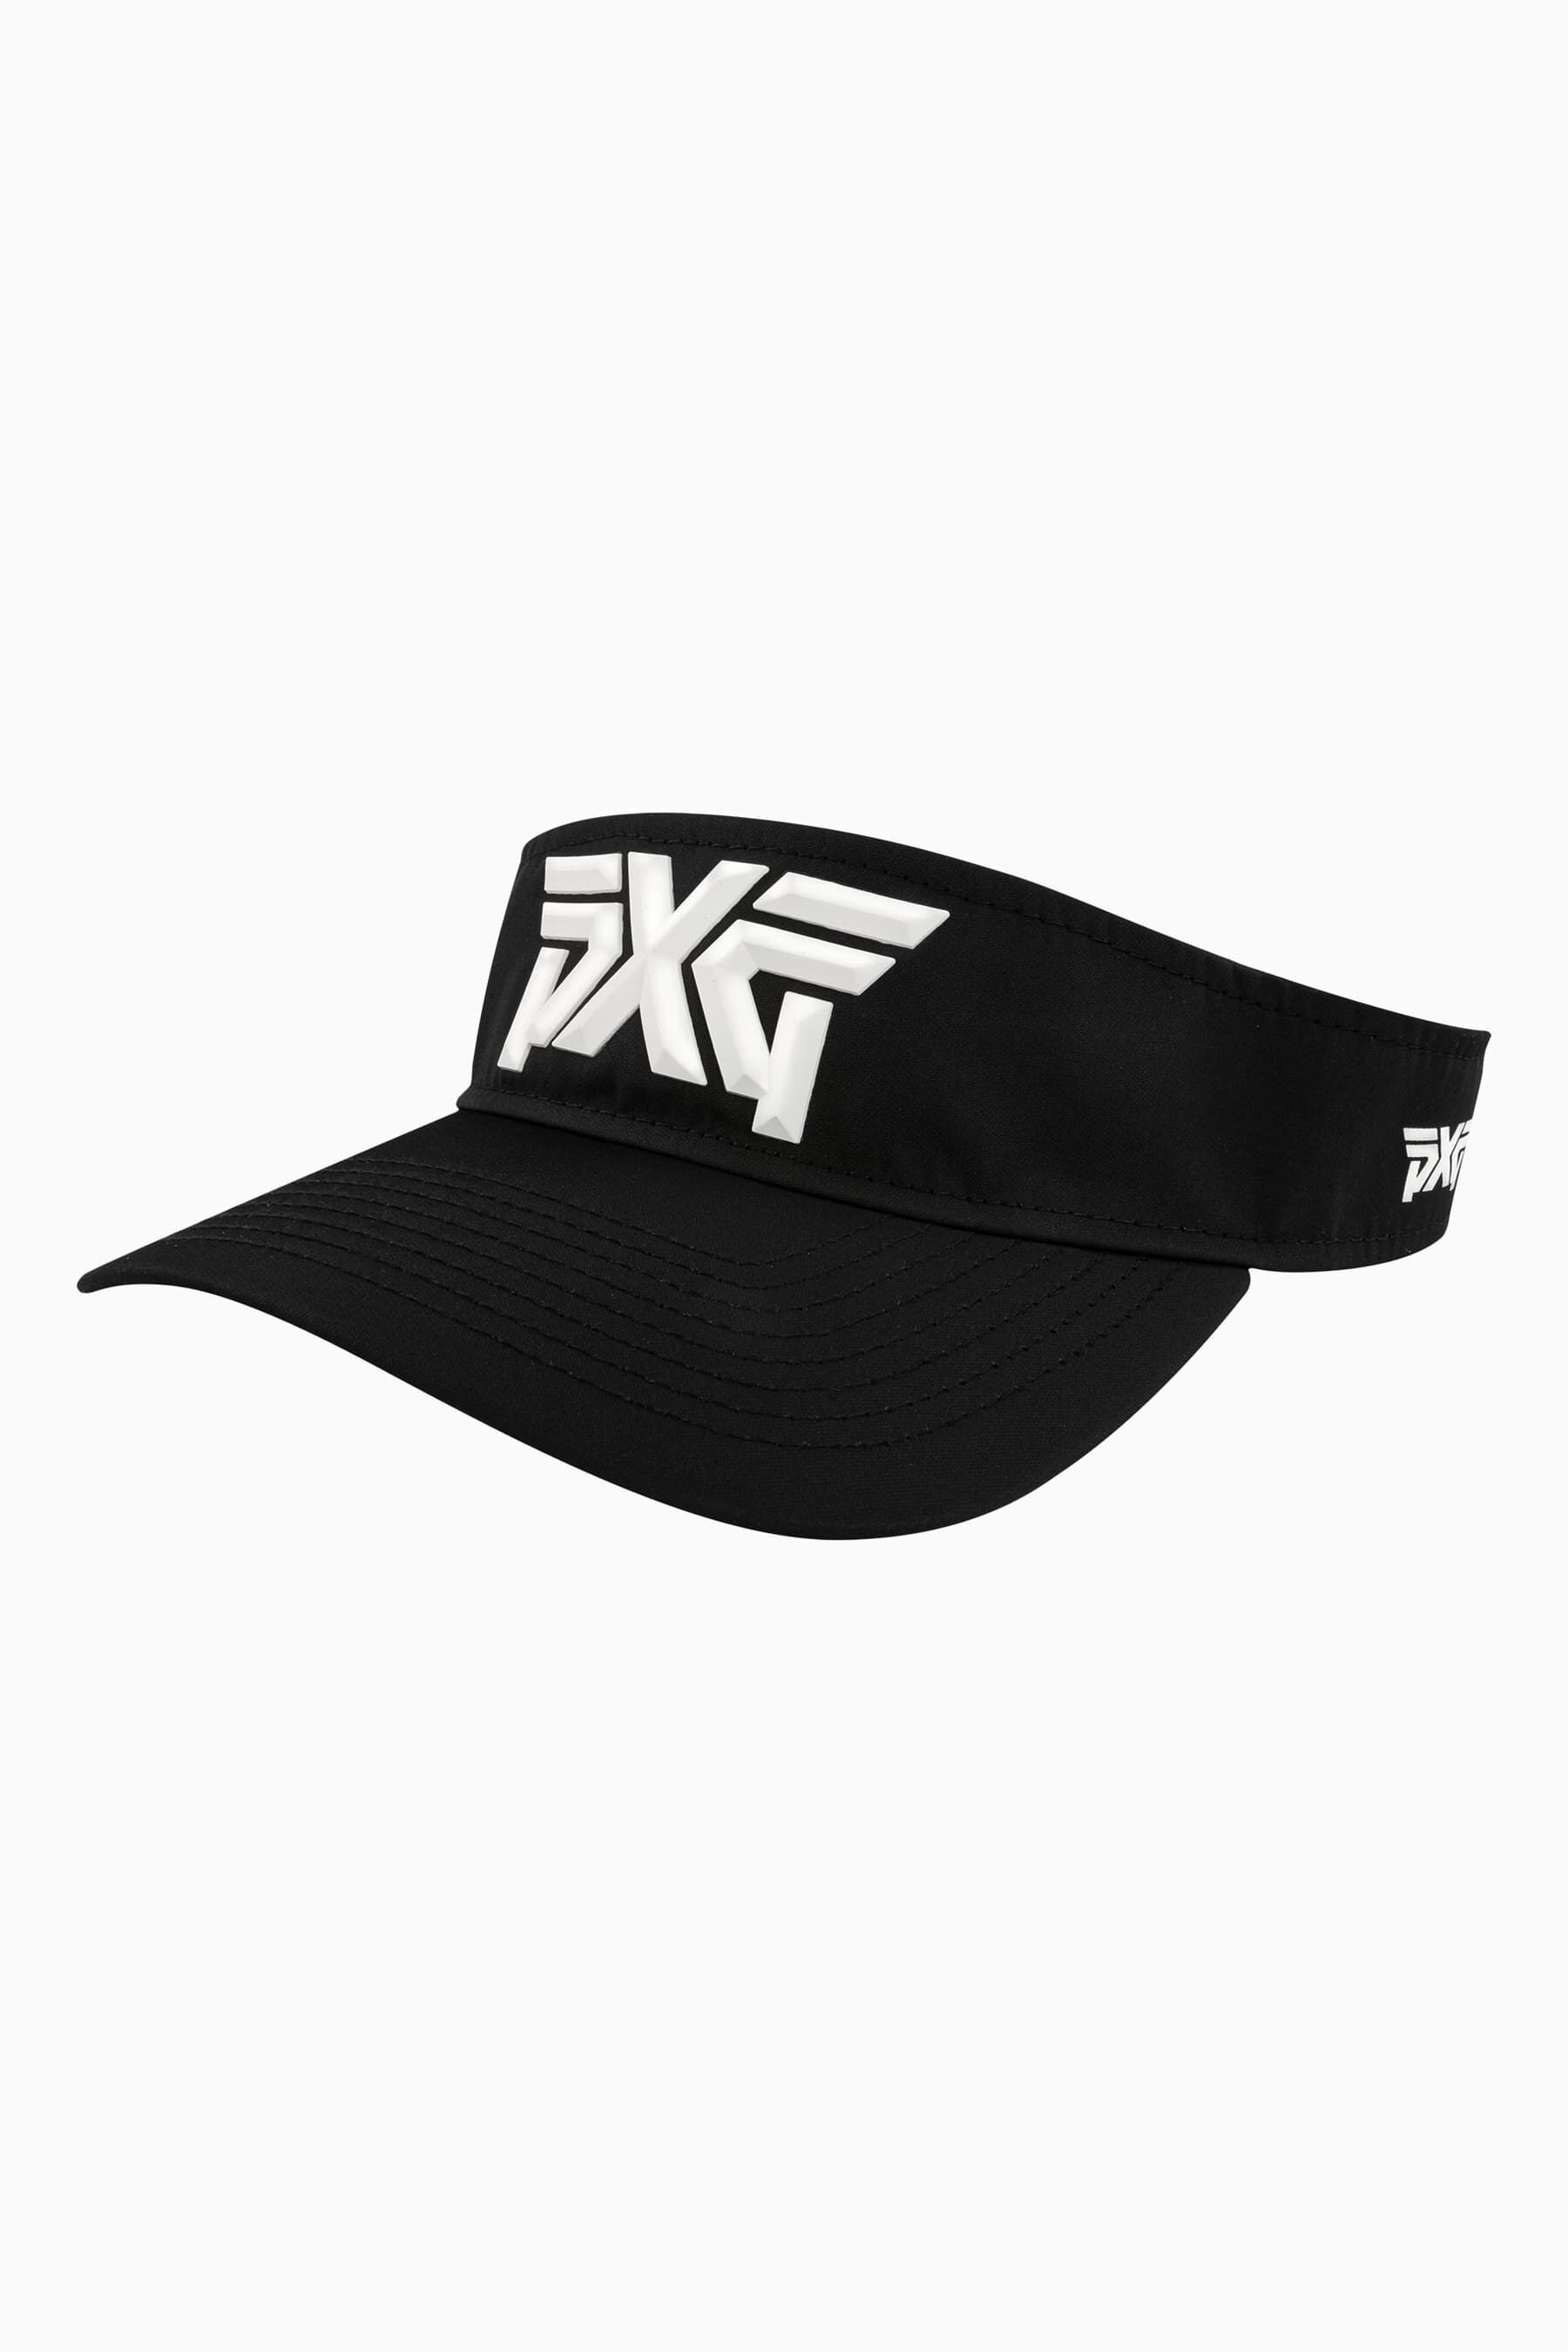 Faceted Logo Sport Visor Shop the Highest Quality Golf Apparel, Gear, Accessories and Golf Clubs at PXG